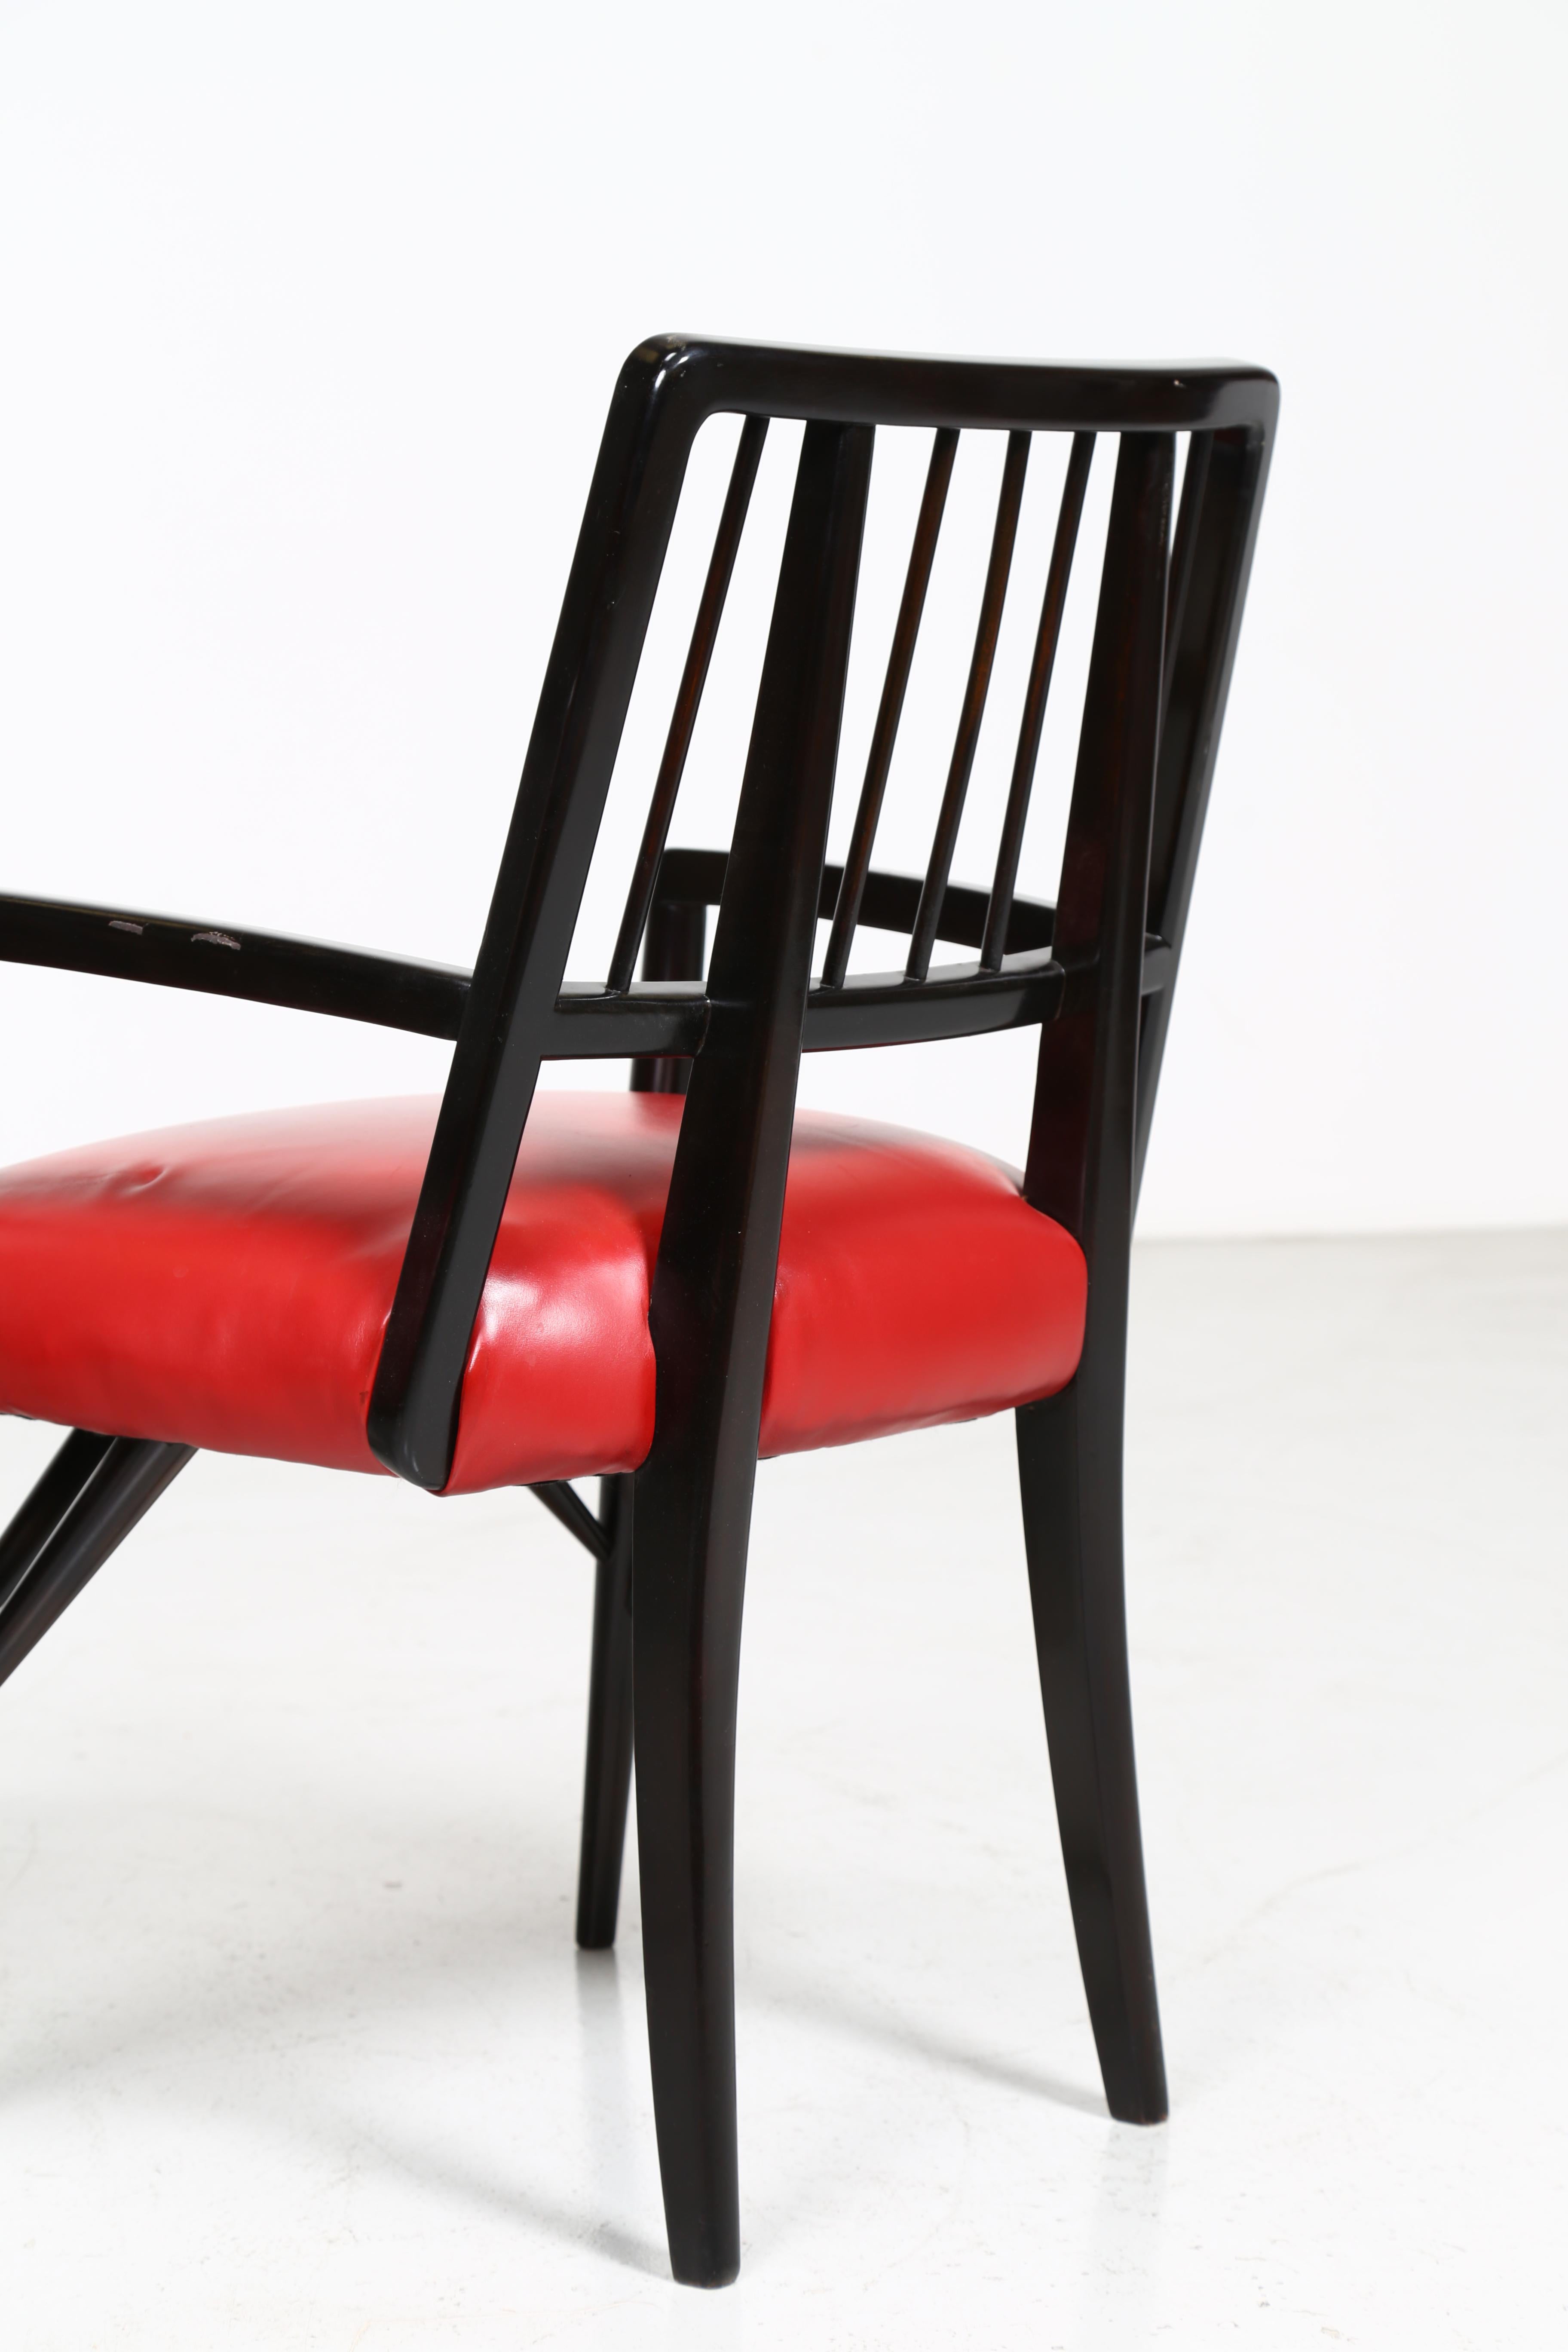 Paul Laszlo Set of Four Chairs in Black Lacquered Wood, 1950s For Sale 5